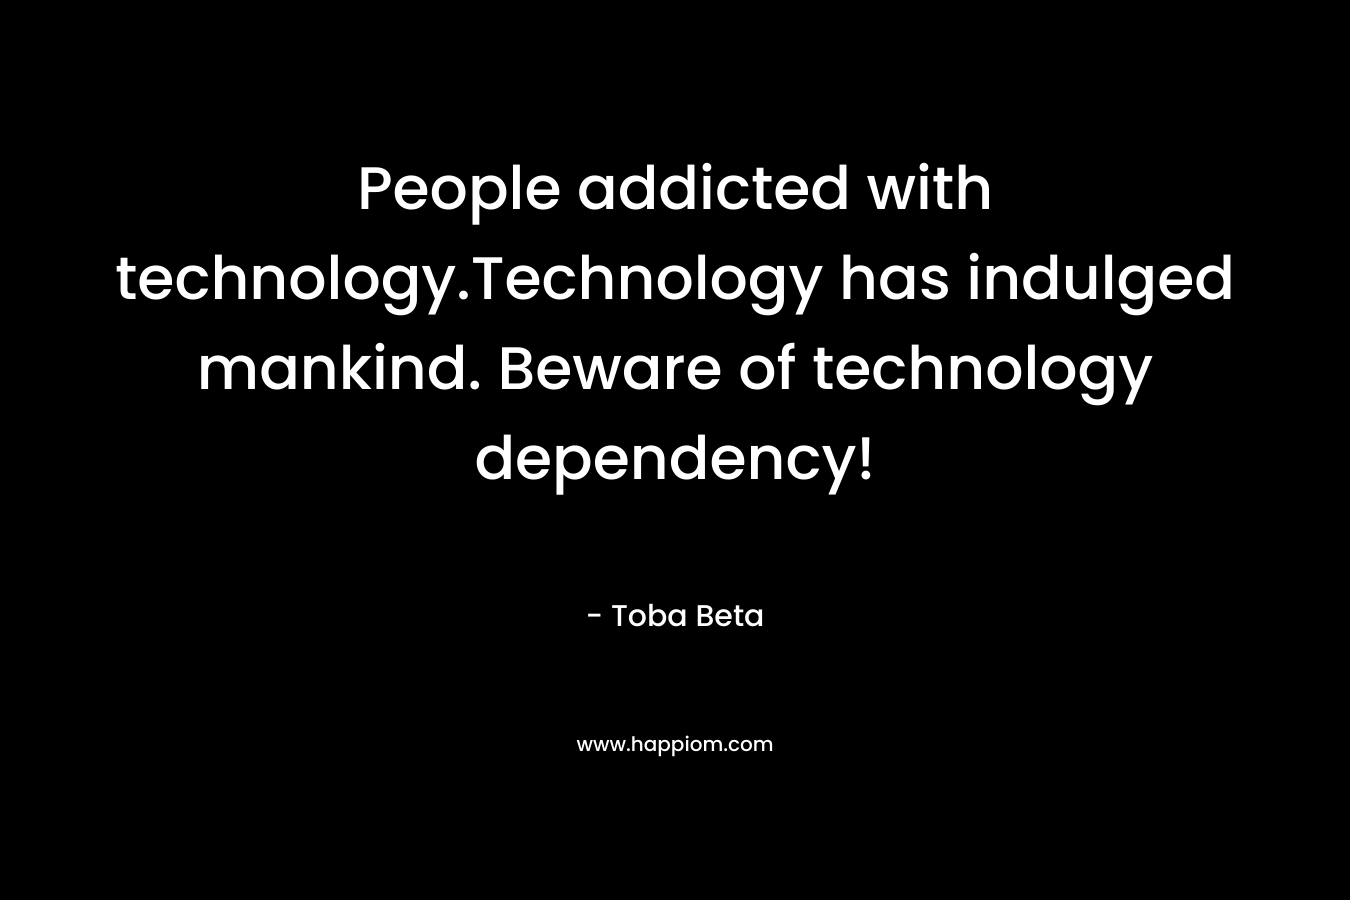 People addicted with technology.Technology has indulged mankind. Beware of technology dependency!